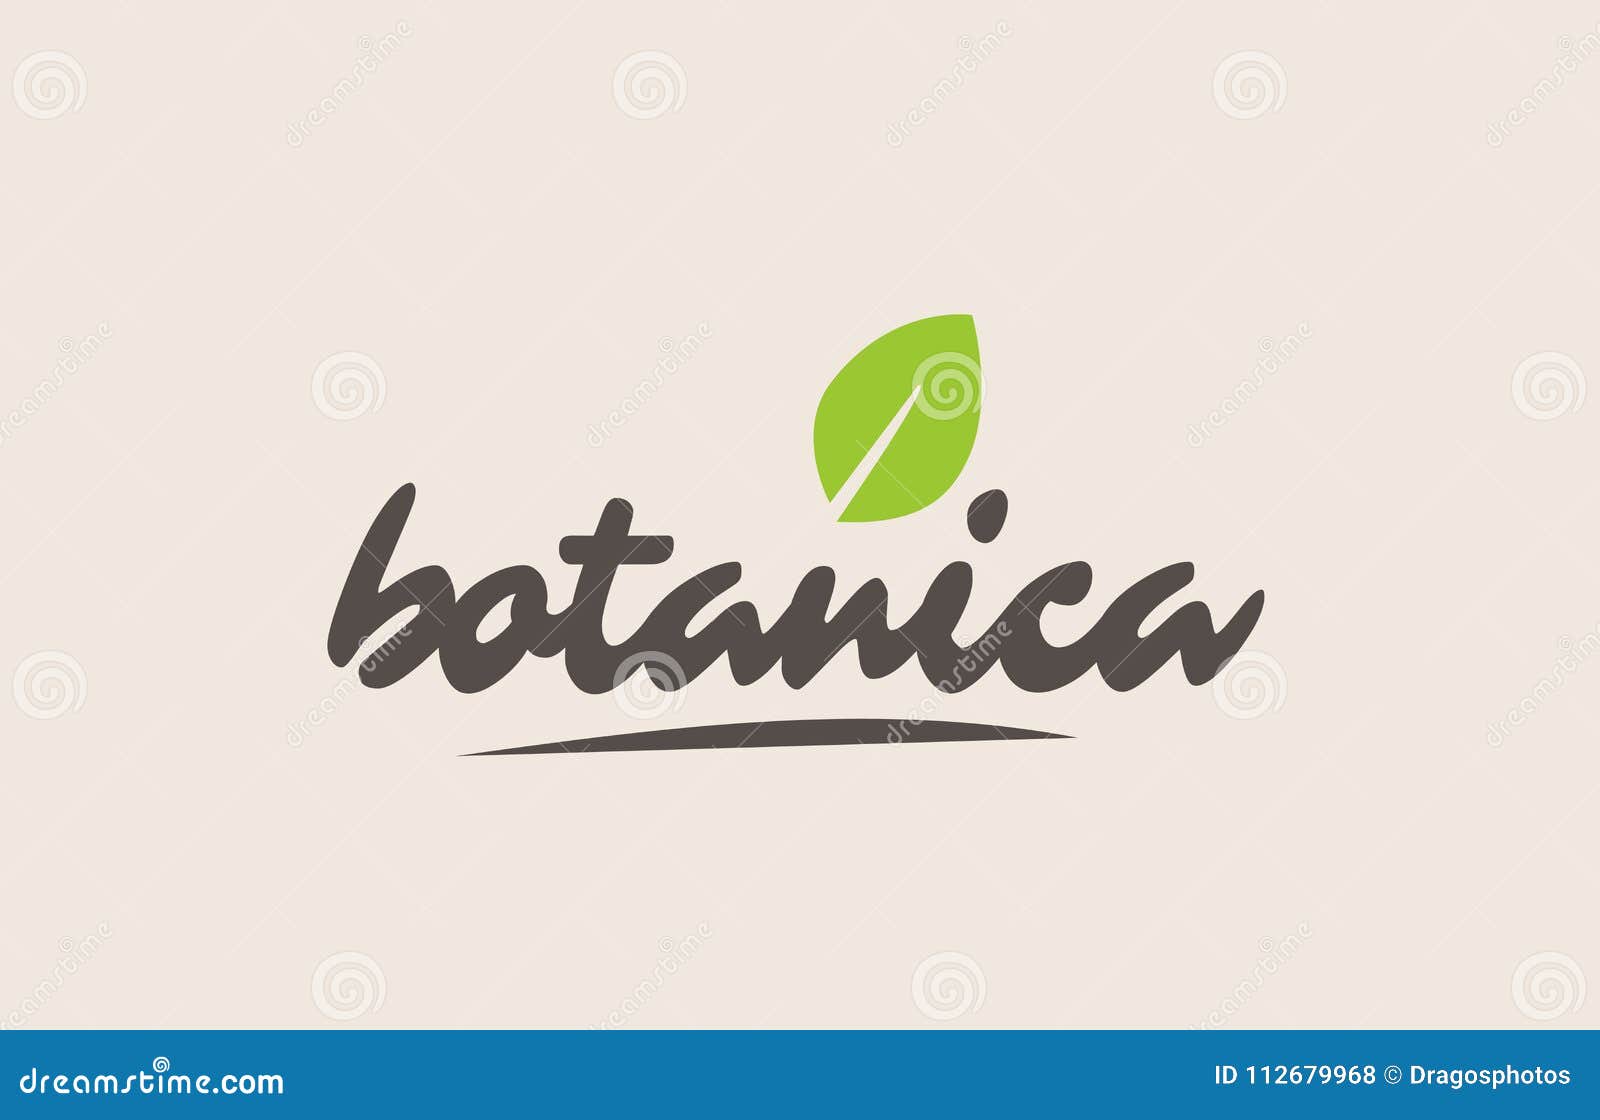 botanica word or text with green leaf. handwritten lettering